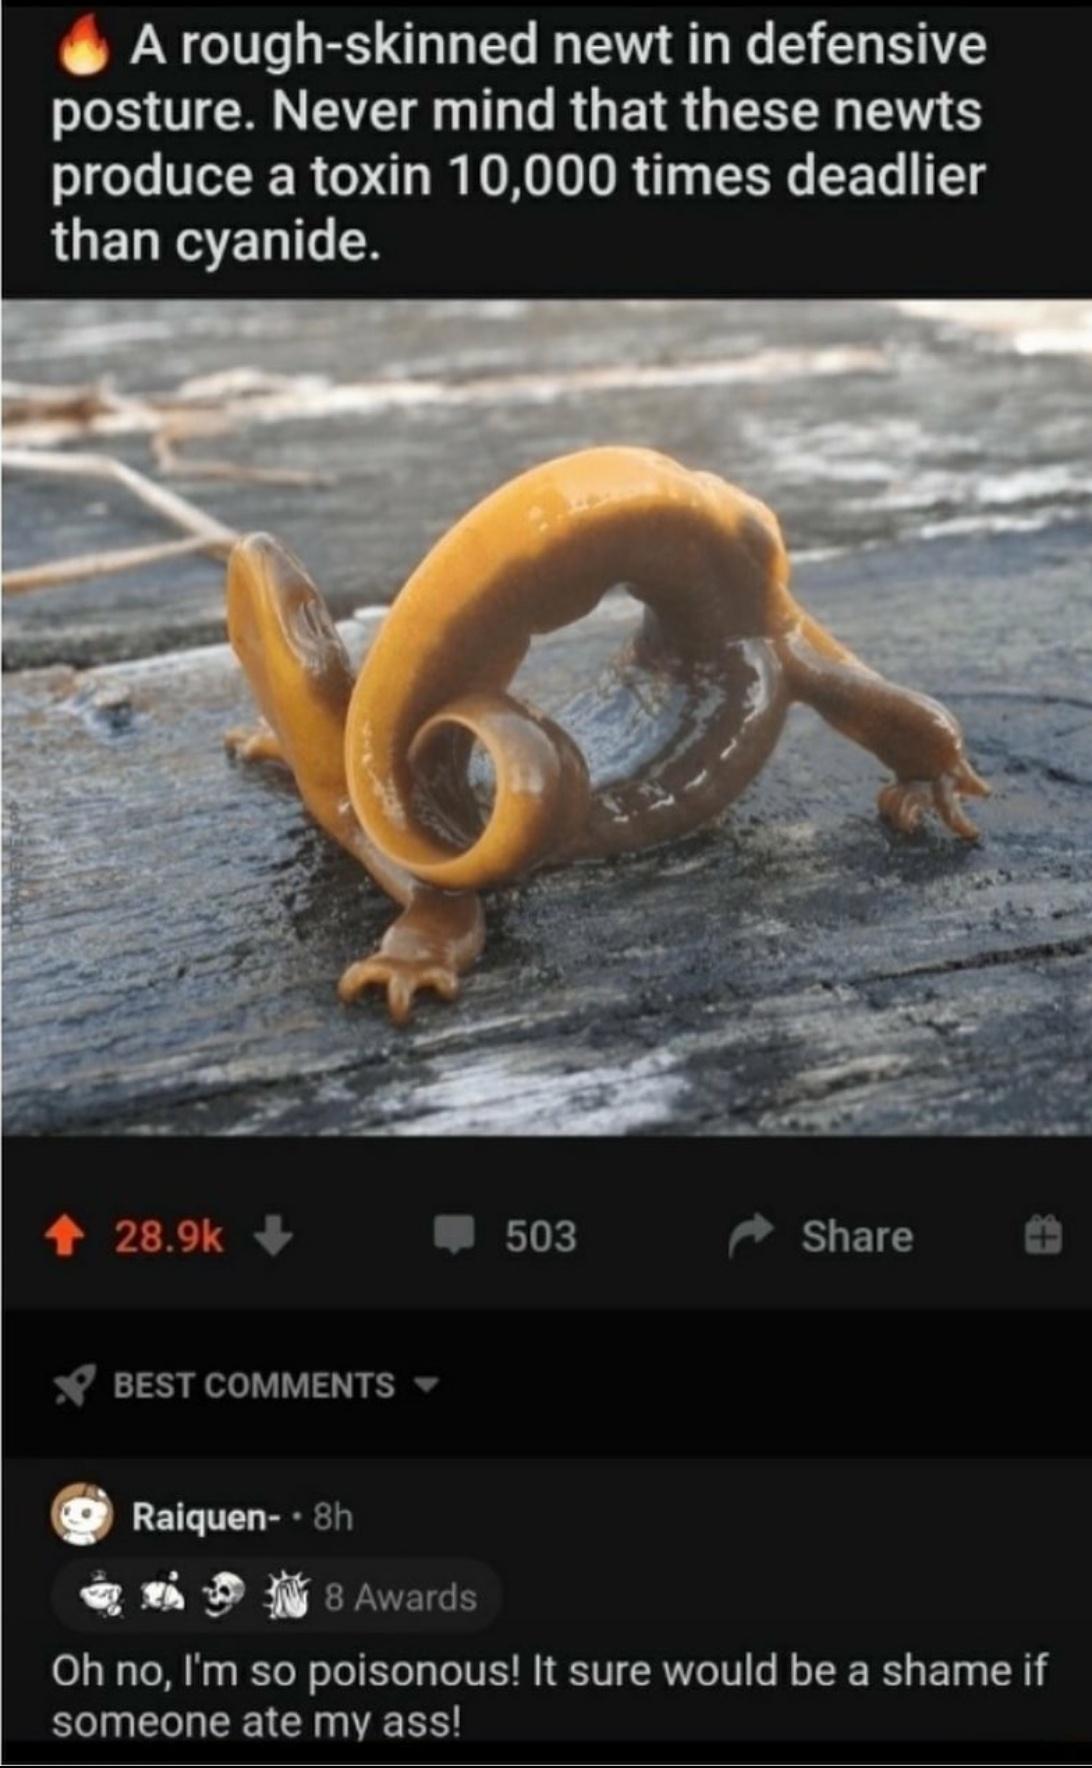 funny memes and pics - poisonous newt meme - A roughskinned newt in defensive posture. Never mind that these newts produce a toxin 10,000 times deadlier than cyanide. 1 503 Best Raiquen 8h On 8 Awards Oh no, I'm so poisonous! It sure would be a shame if s